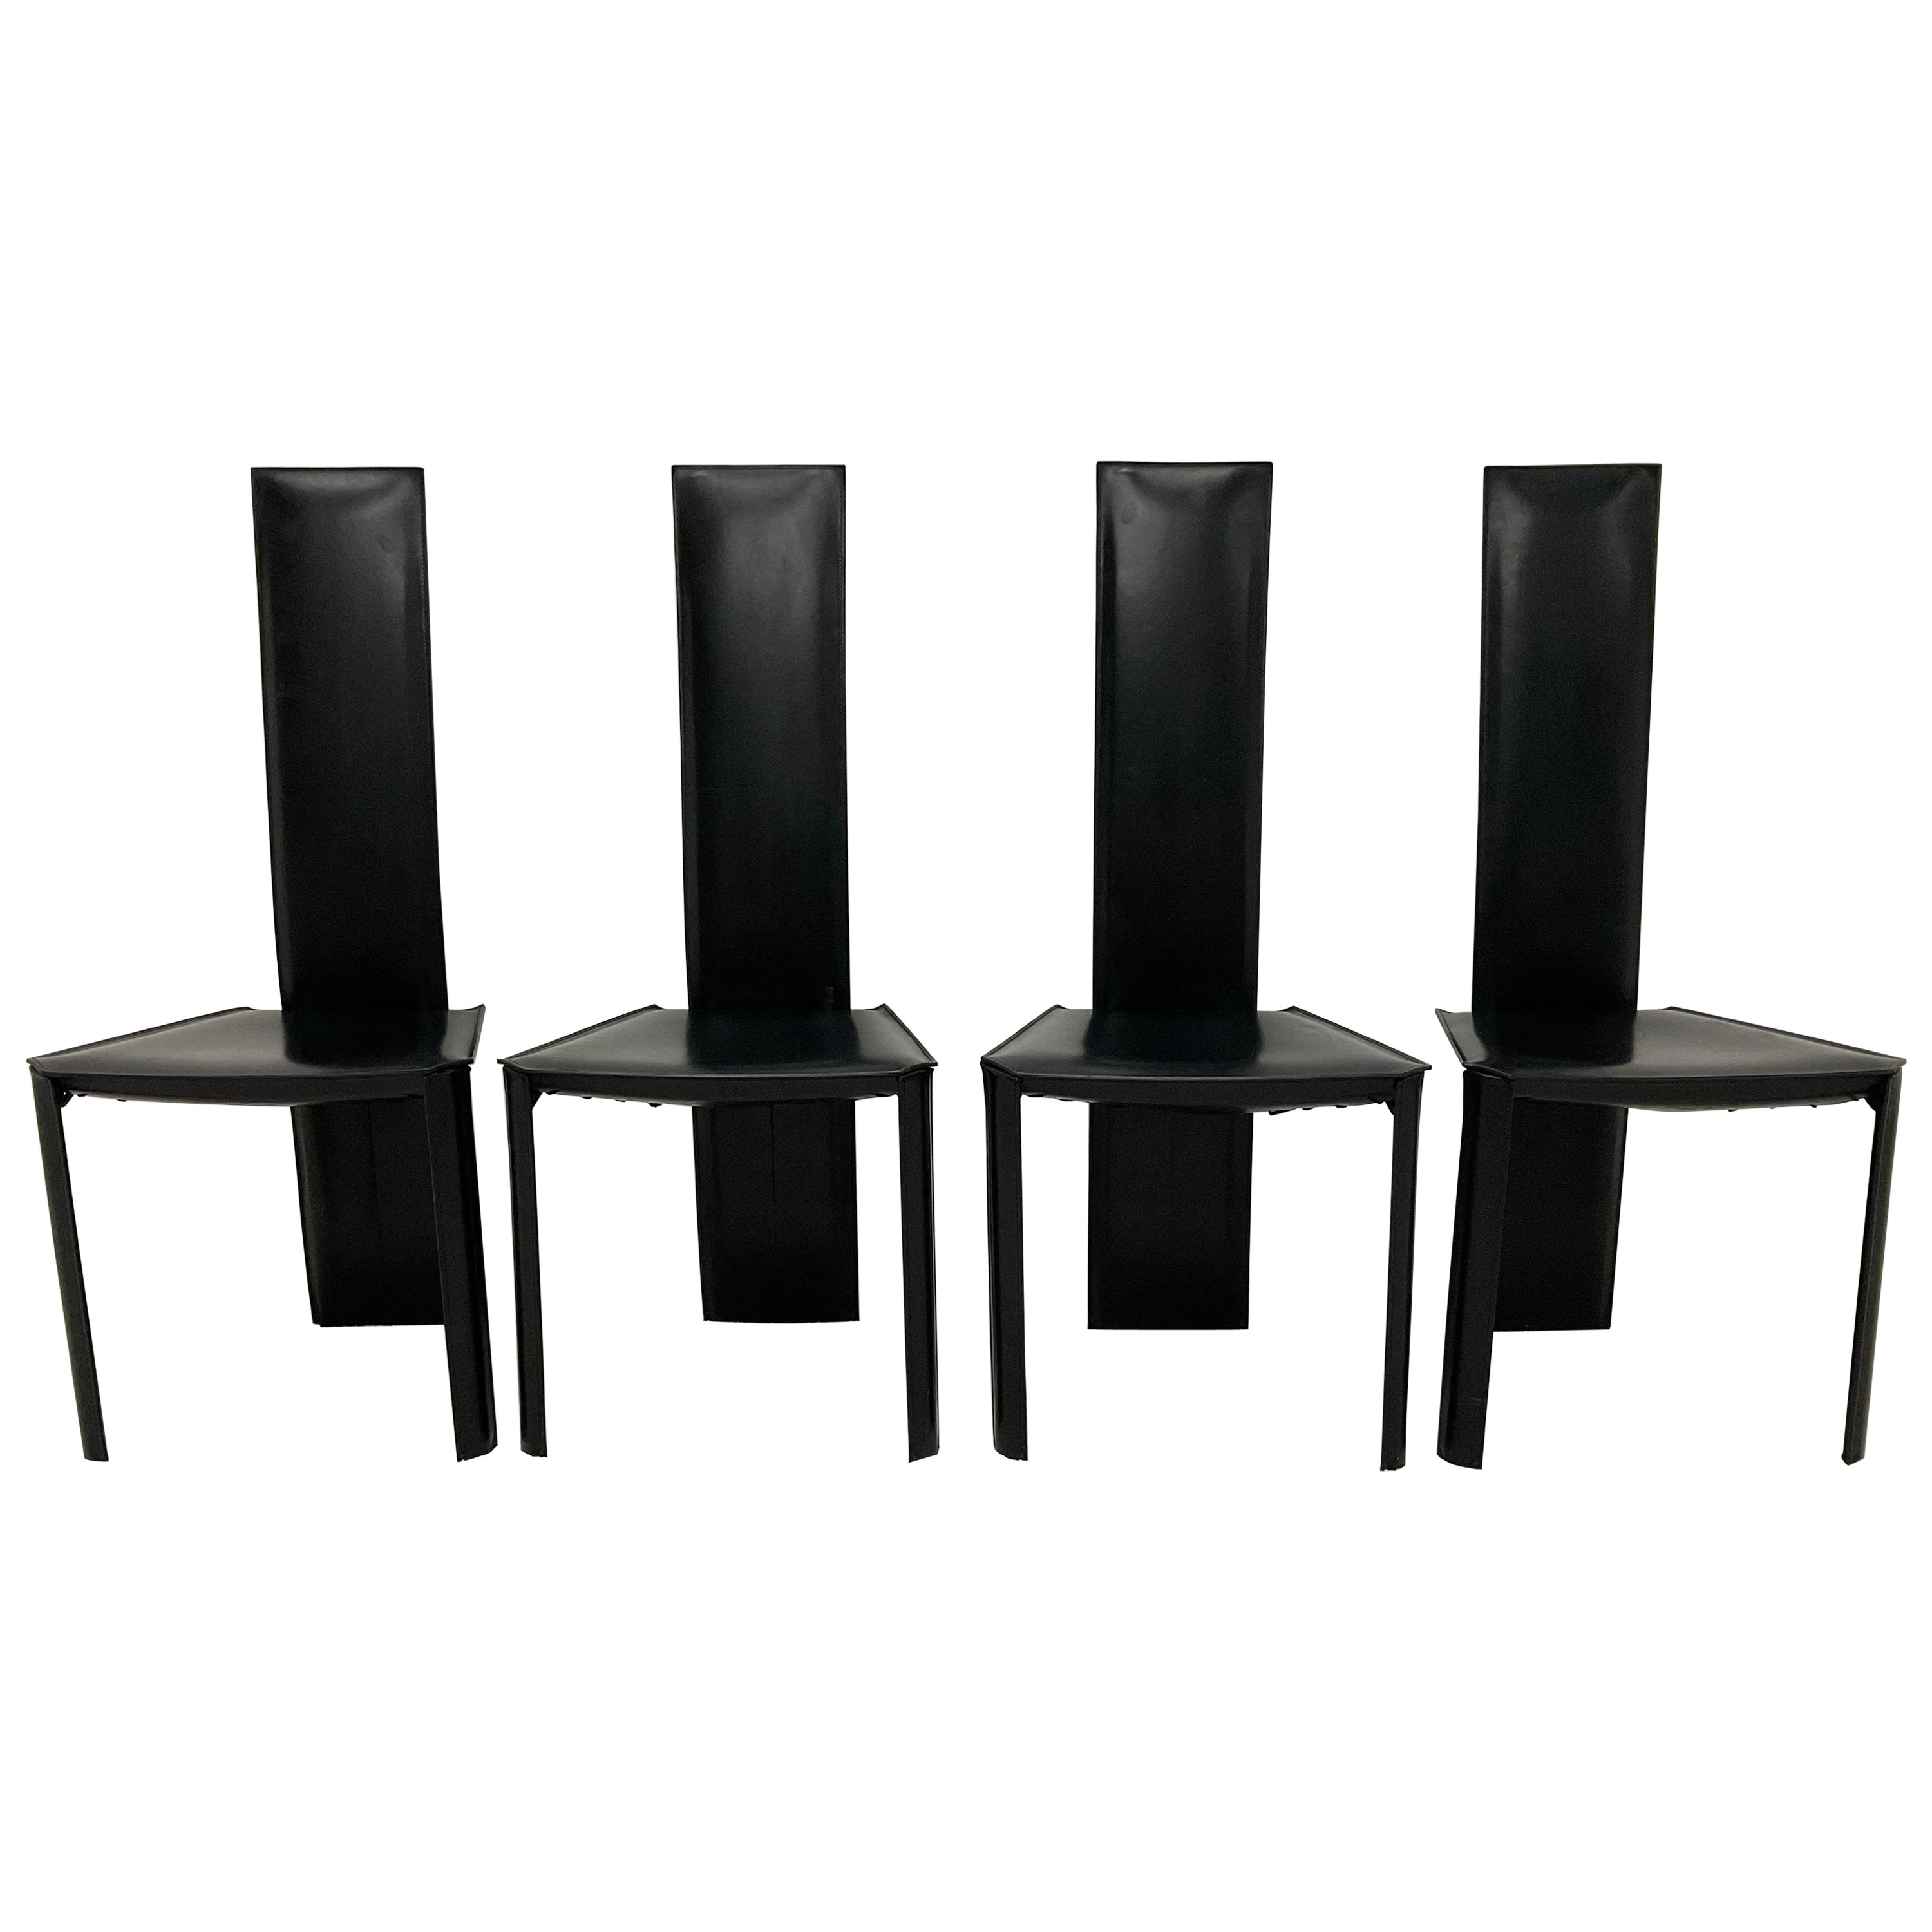 Postmodern Brazilian Modern De Couro Black Leather Dining Chairs, Set of Four For Sale